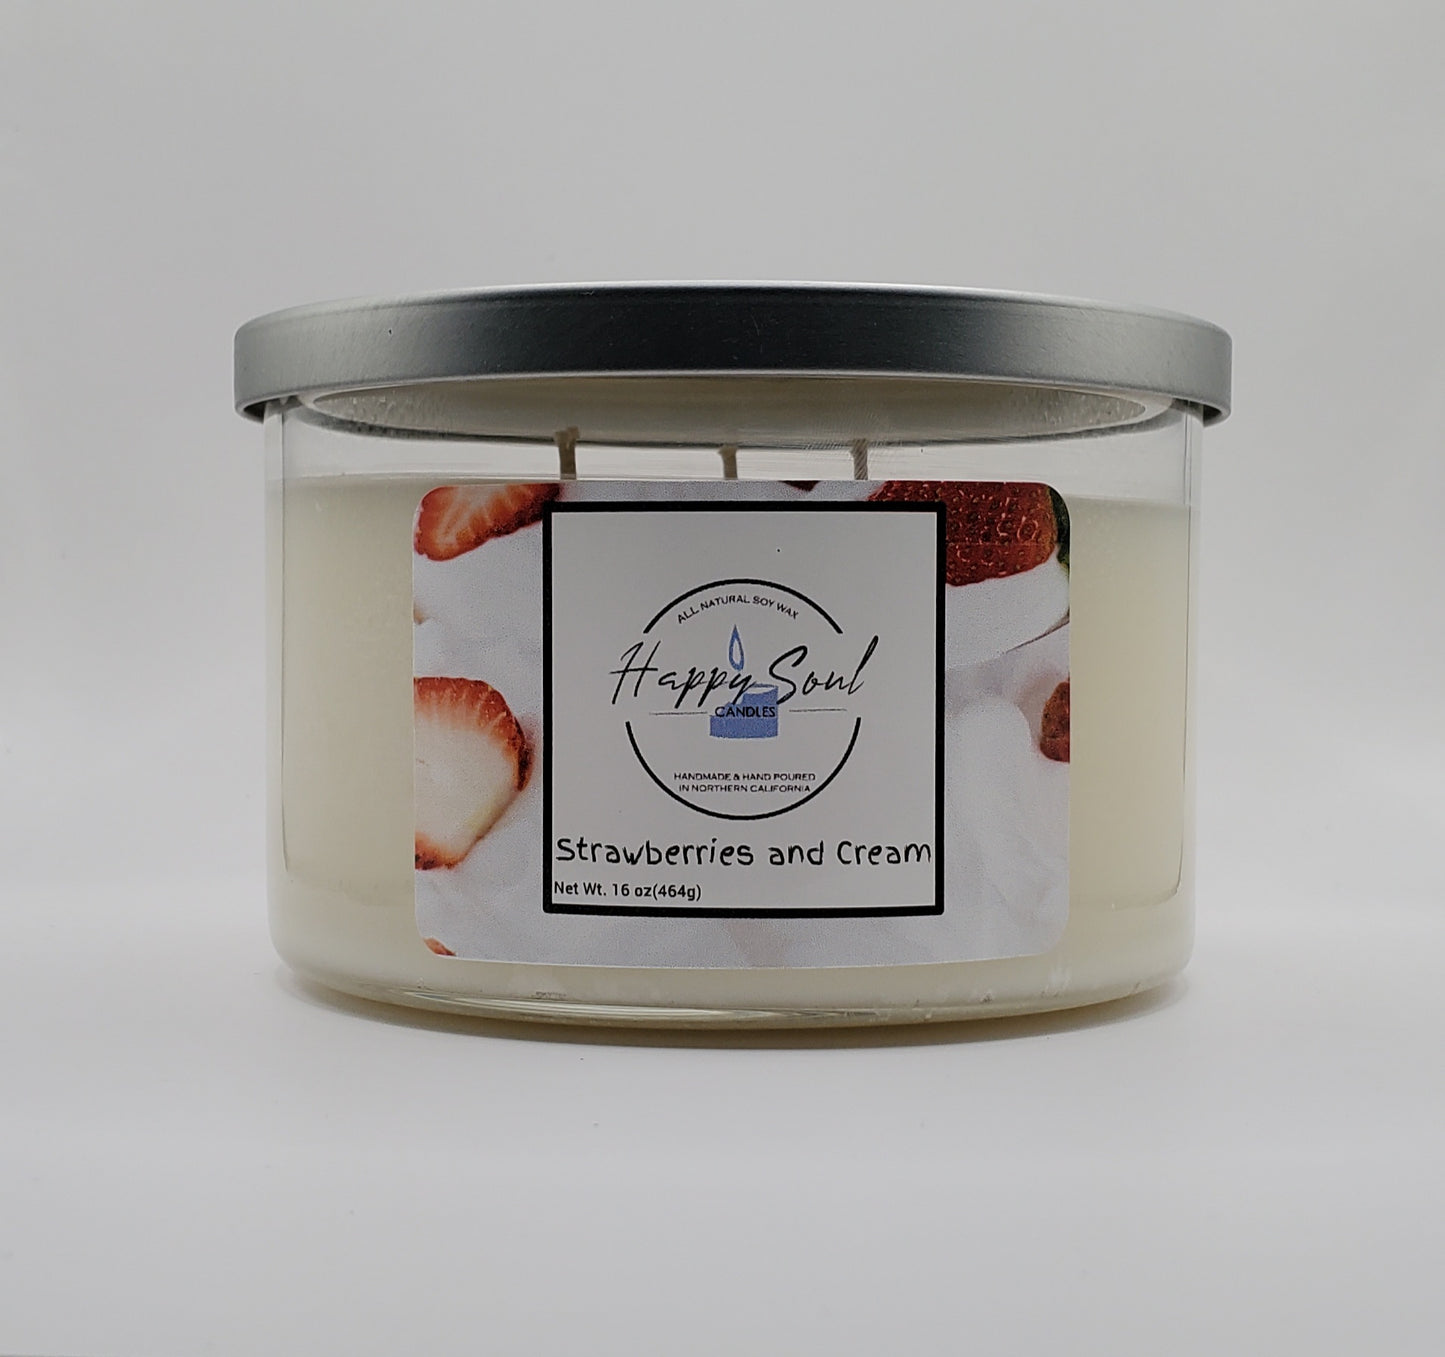 Strawberries and Cream 3-Wick Soy Candle (16oz)